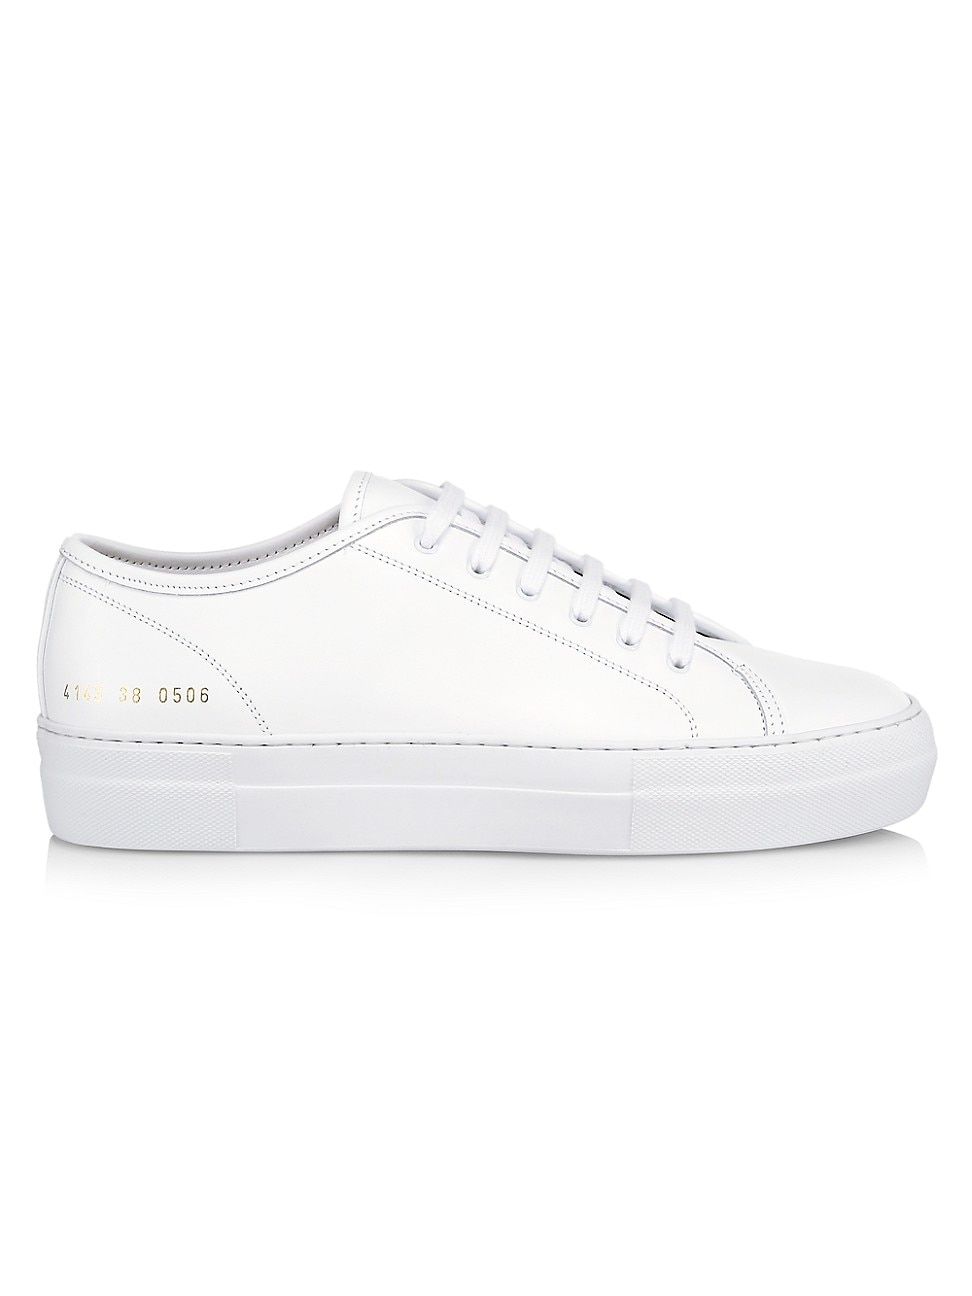 Common Projects Tournament Low-Top Super Platform Sneakers | Saks Fifth Avenue